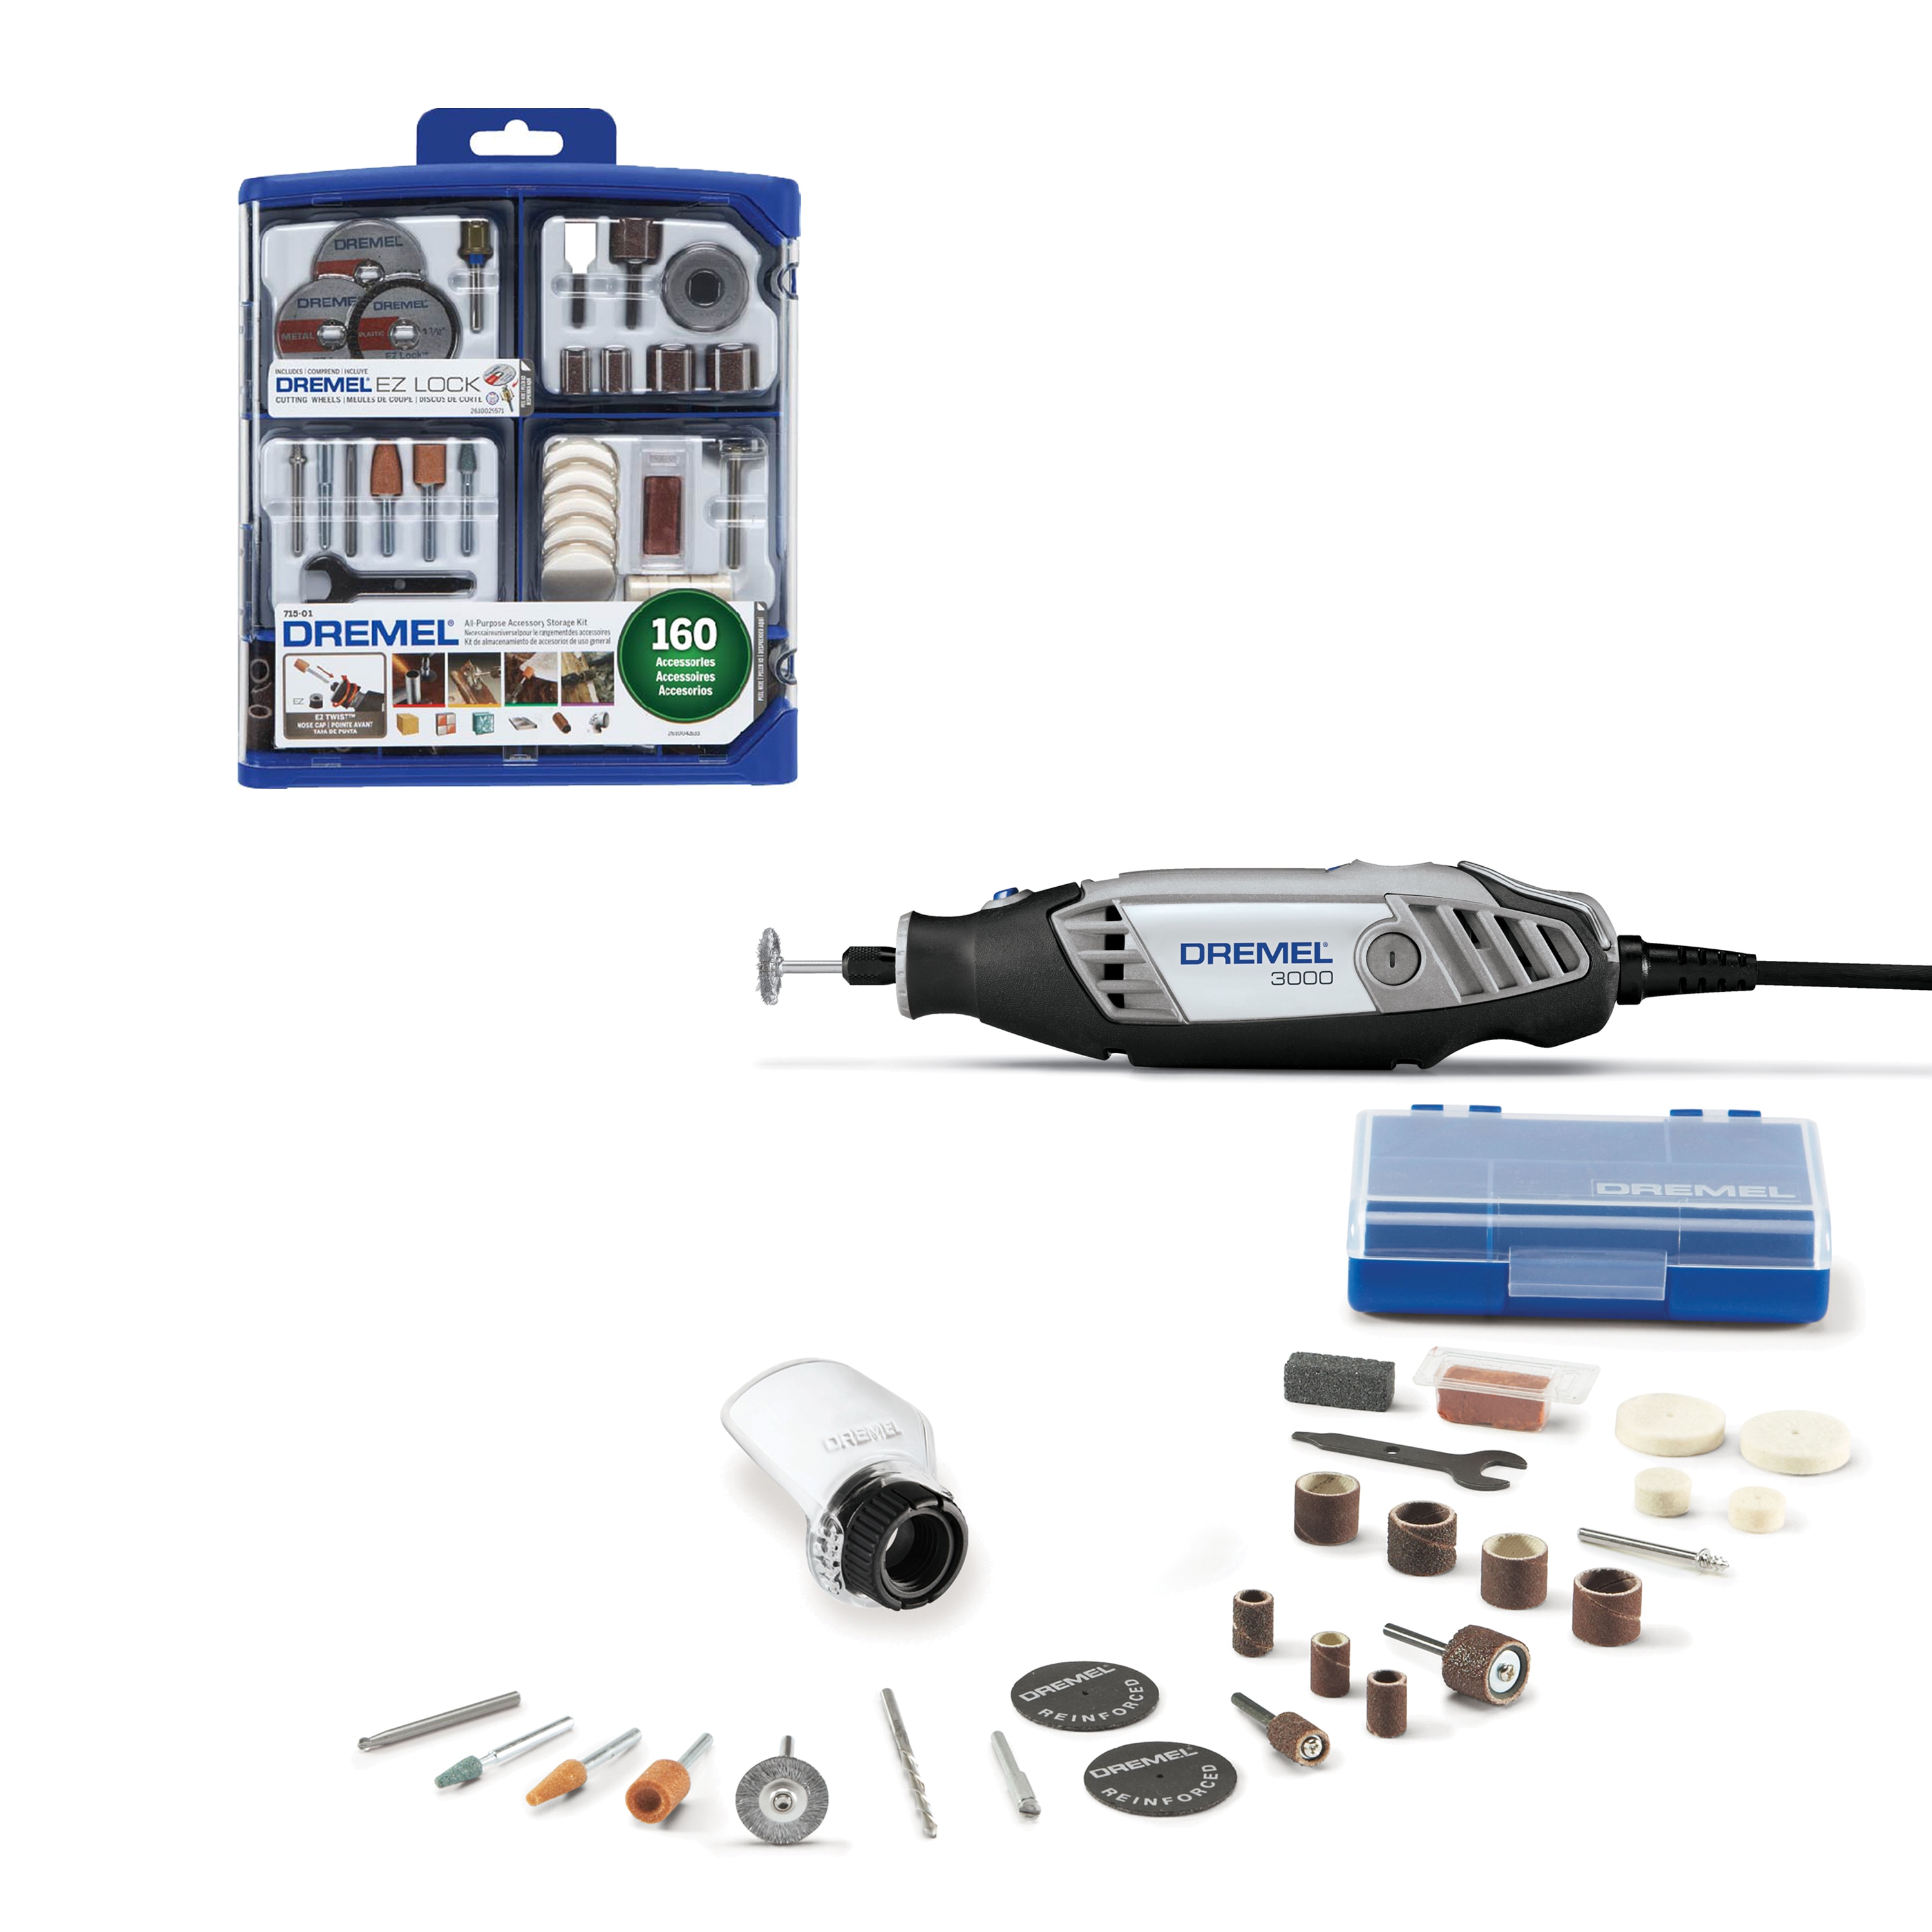 Shop Dremel 3000 Corded Variable Rotary Tool with 1 Attachment and 25 Accessories + 160-Piece Accessory Kit at Lowes.com